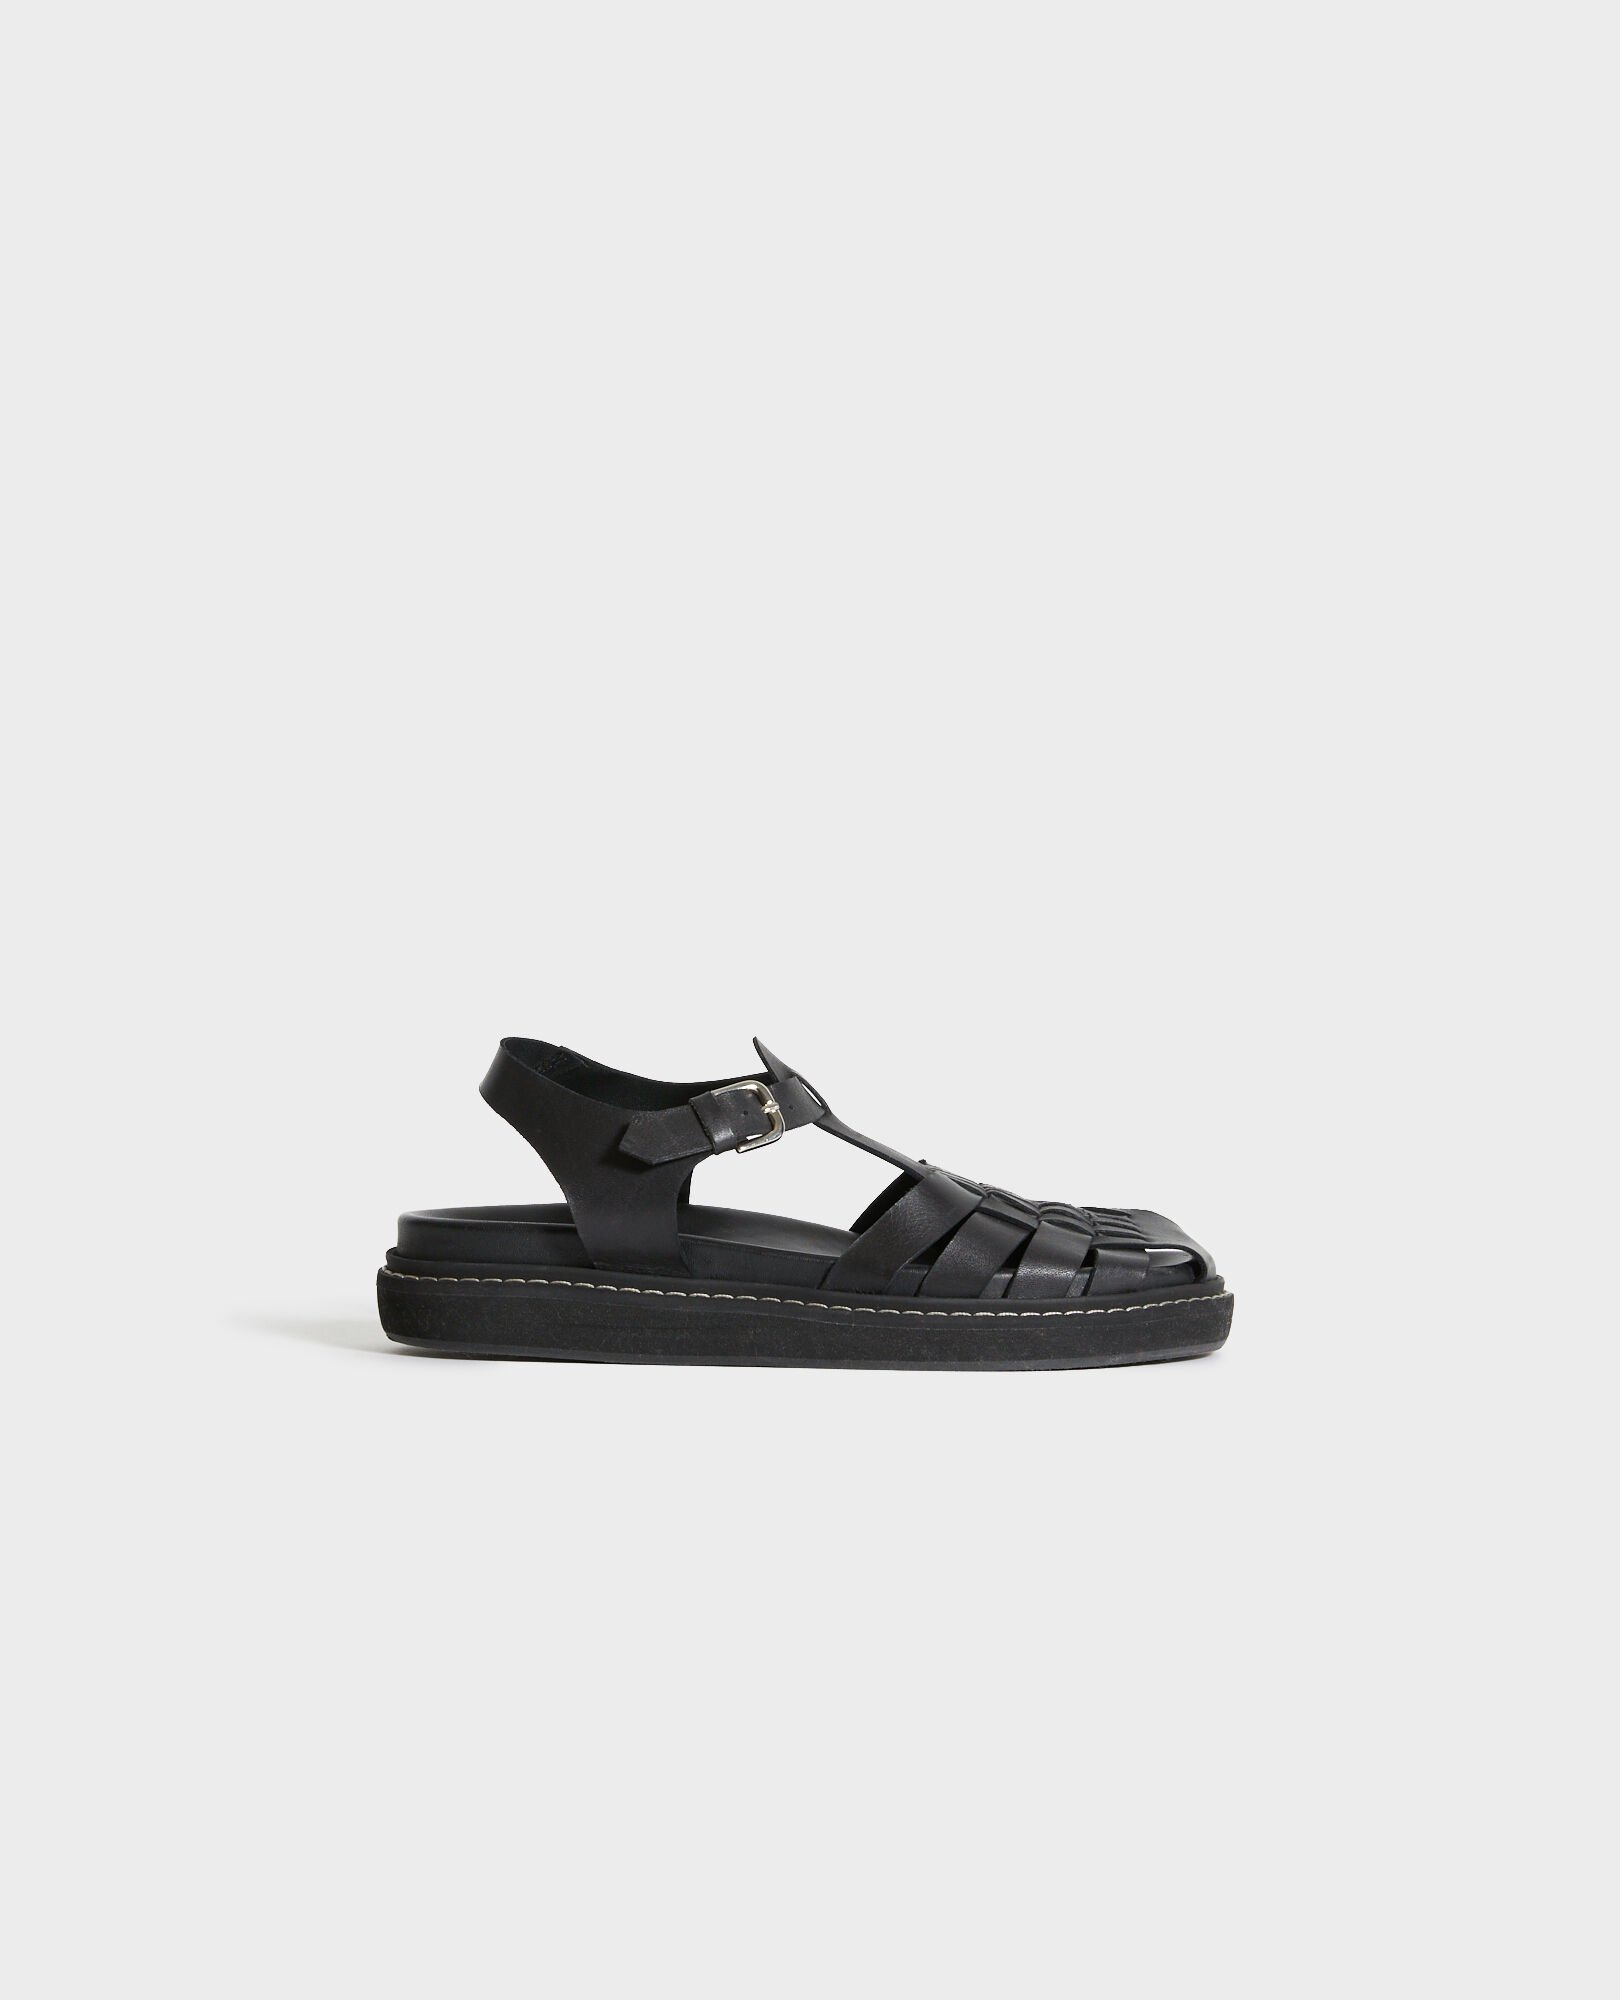 Leather sandals 09 black 2ss22442